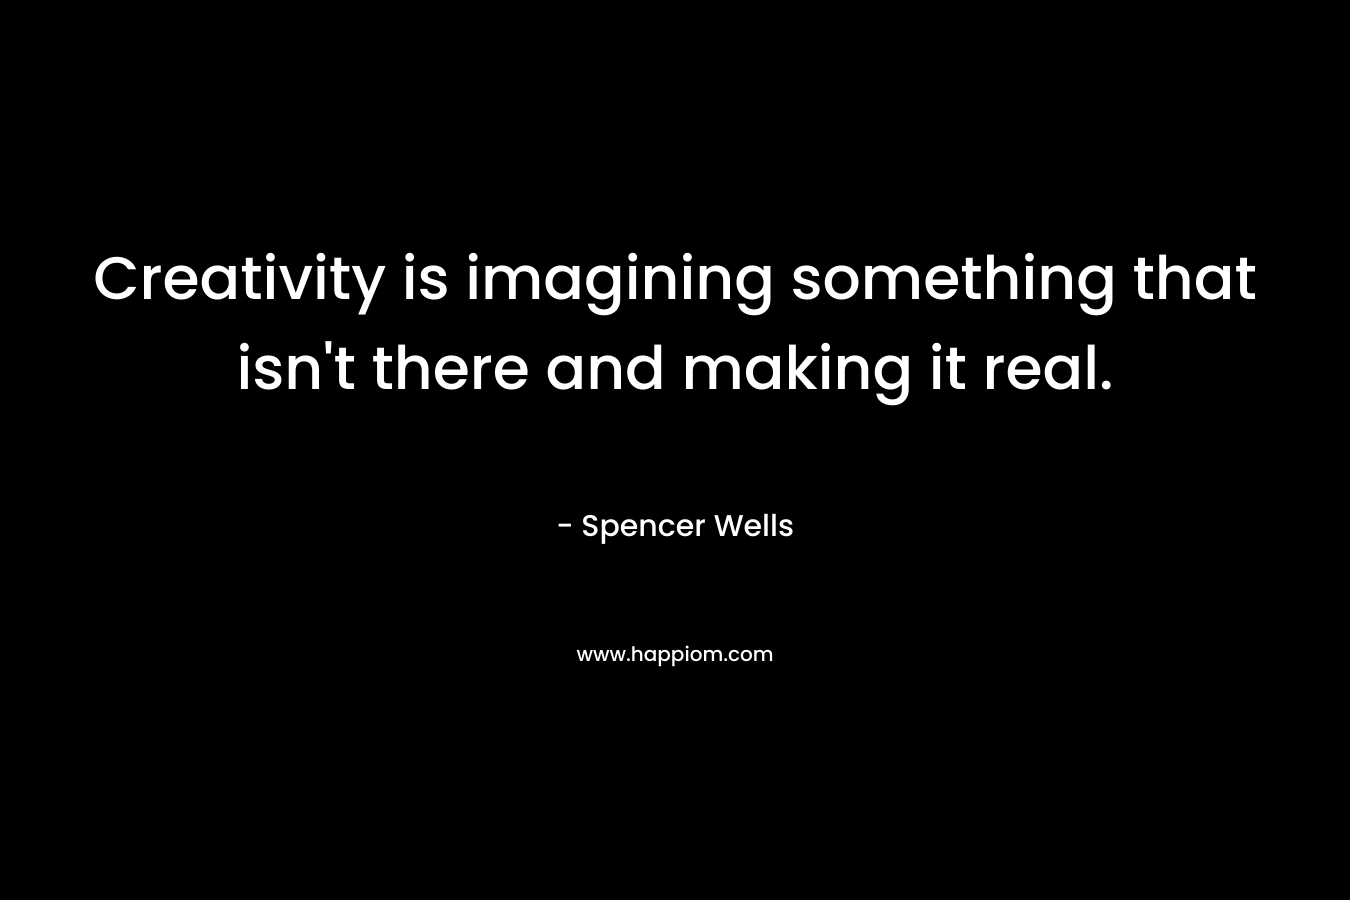 Creativity is imagining something that isn't there and making it real.